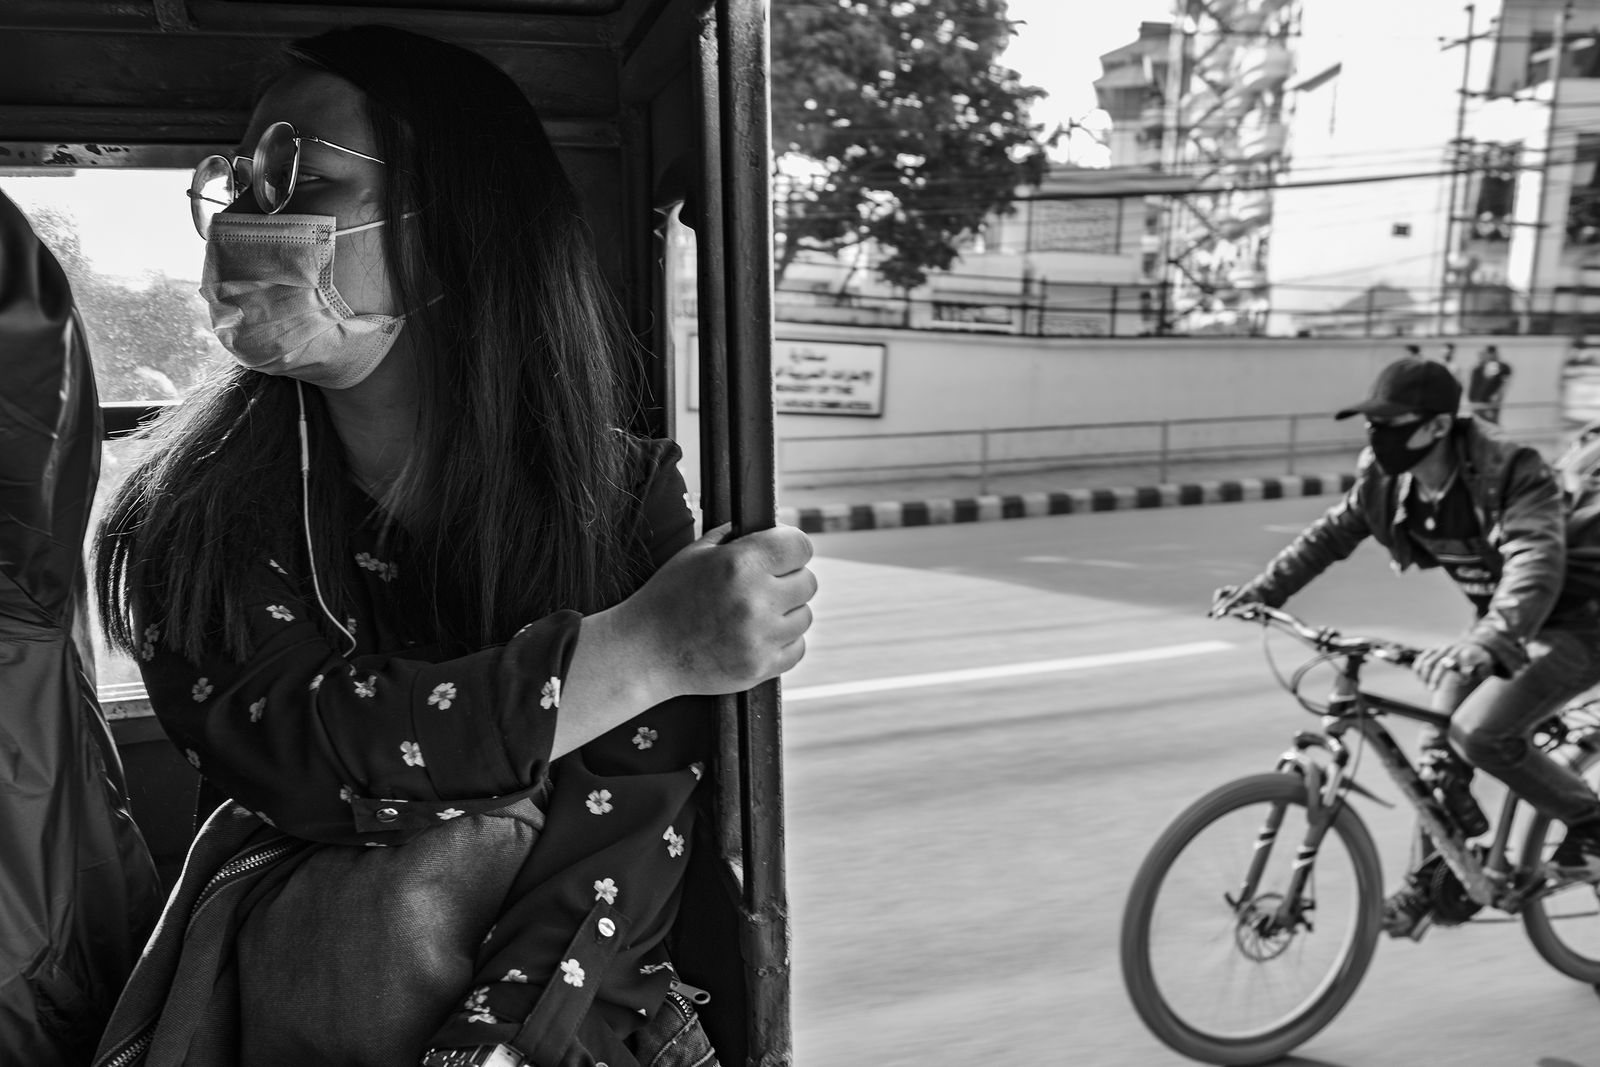 © Marco Sacco - Image from the Air Pollution, Kathmandu photography project